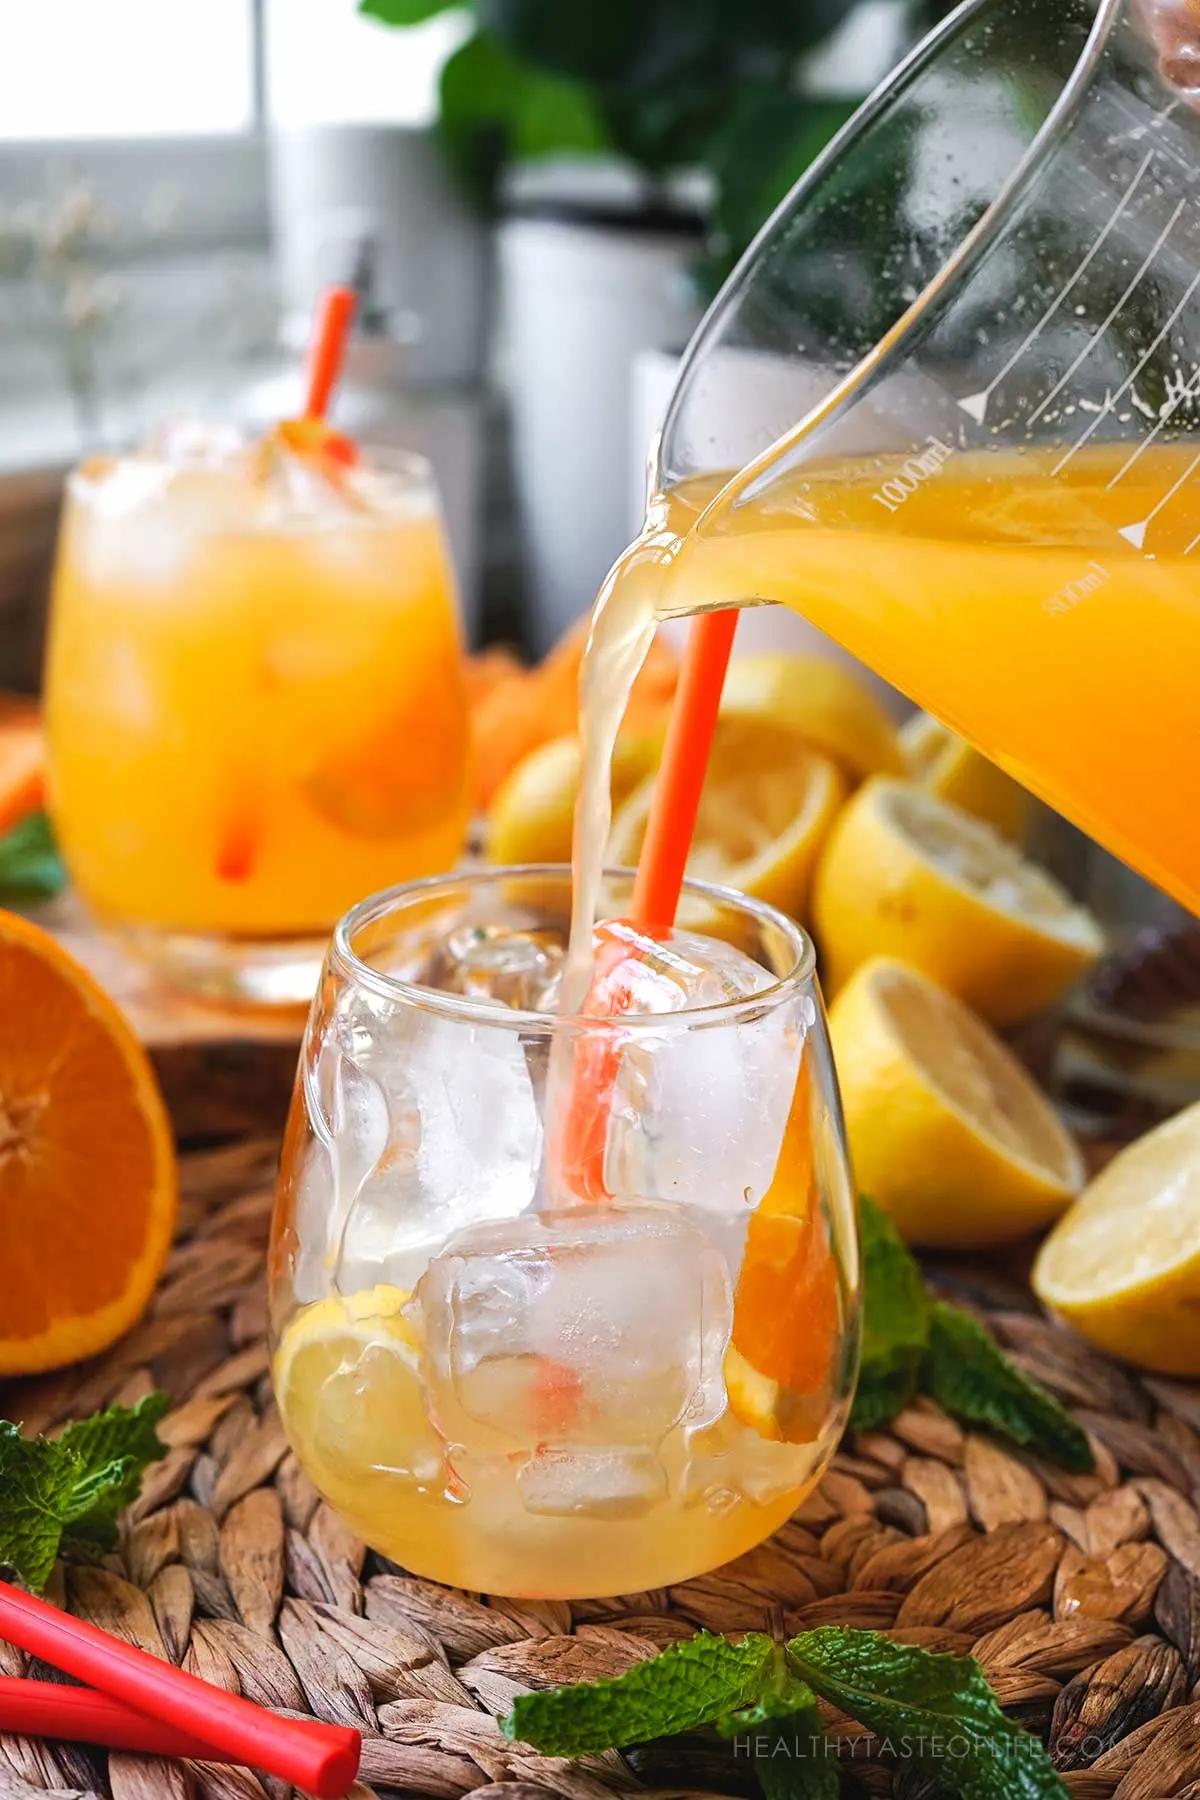 Picture showing pouring the orange lemonade in the glass.